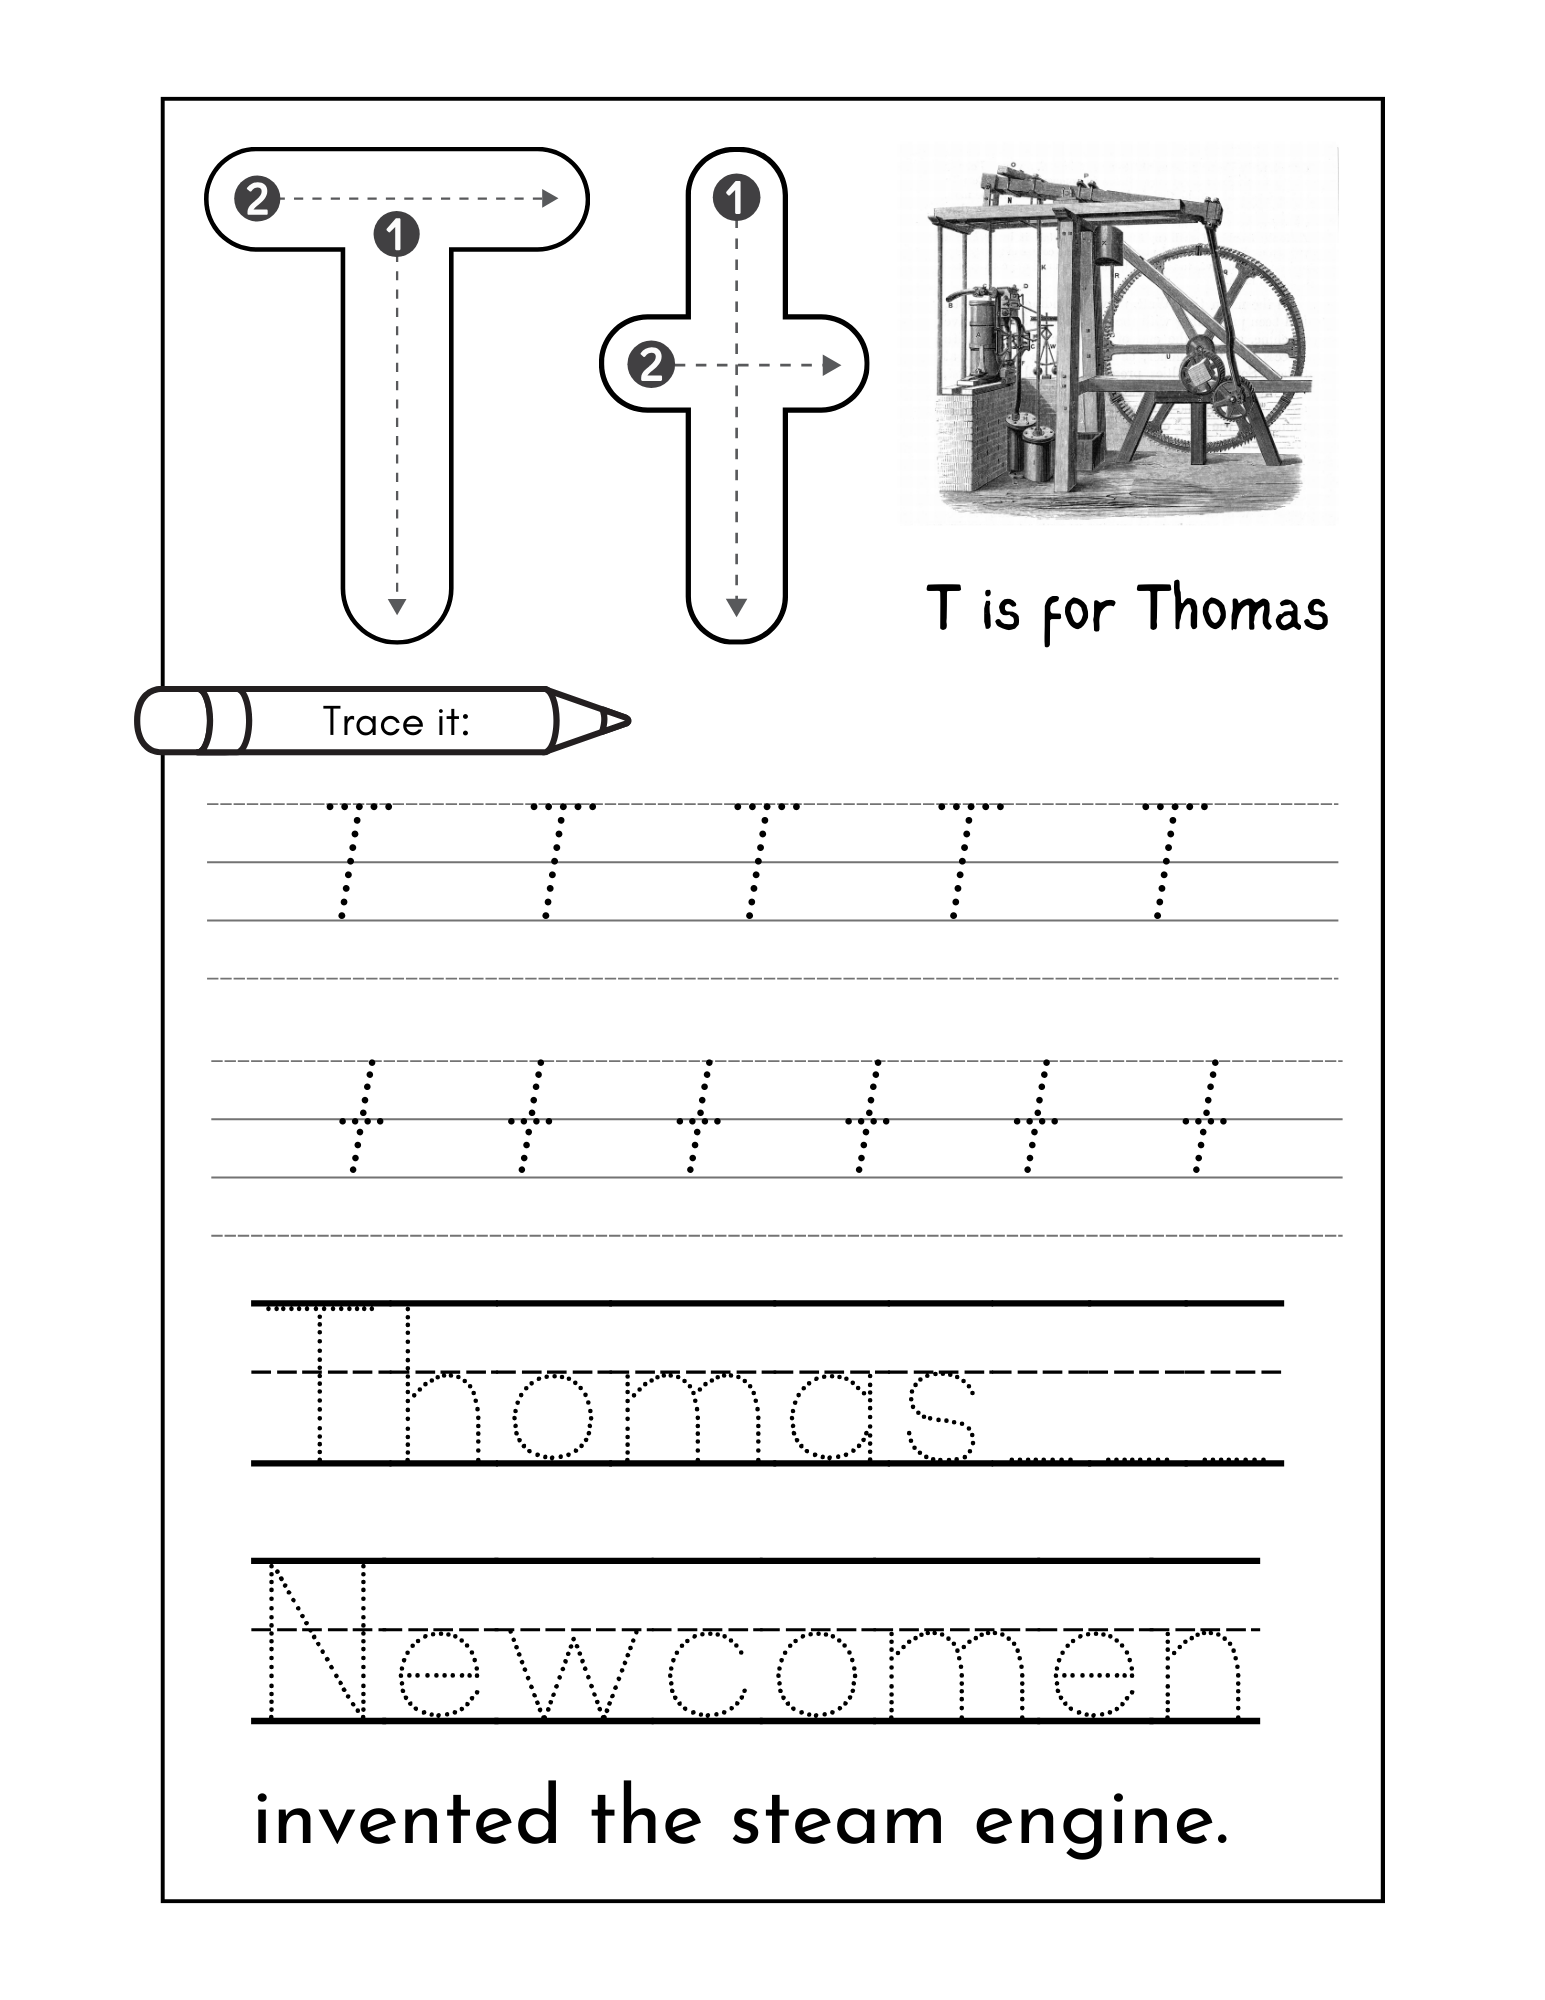 T is for Thomas.png__PID:51627718-a969-4385-9bc5-61dd8abfcaf3